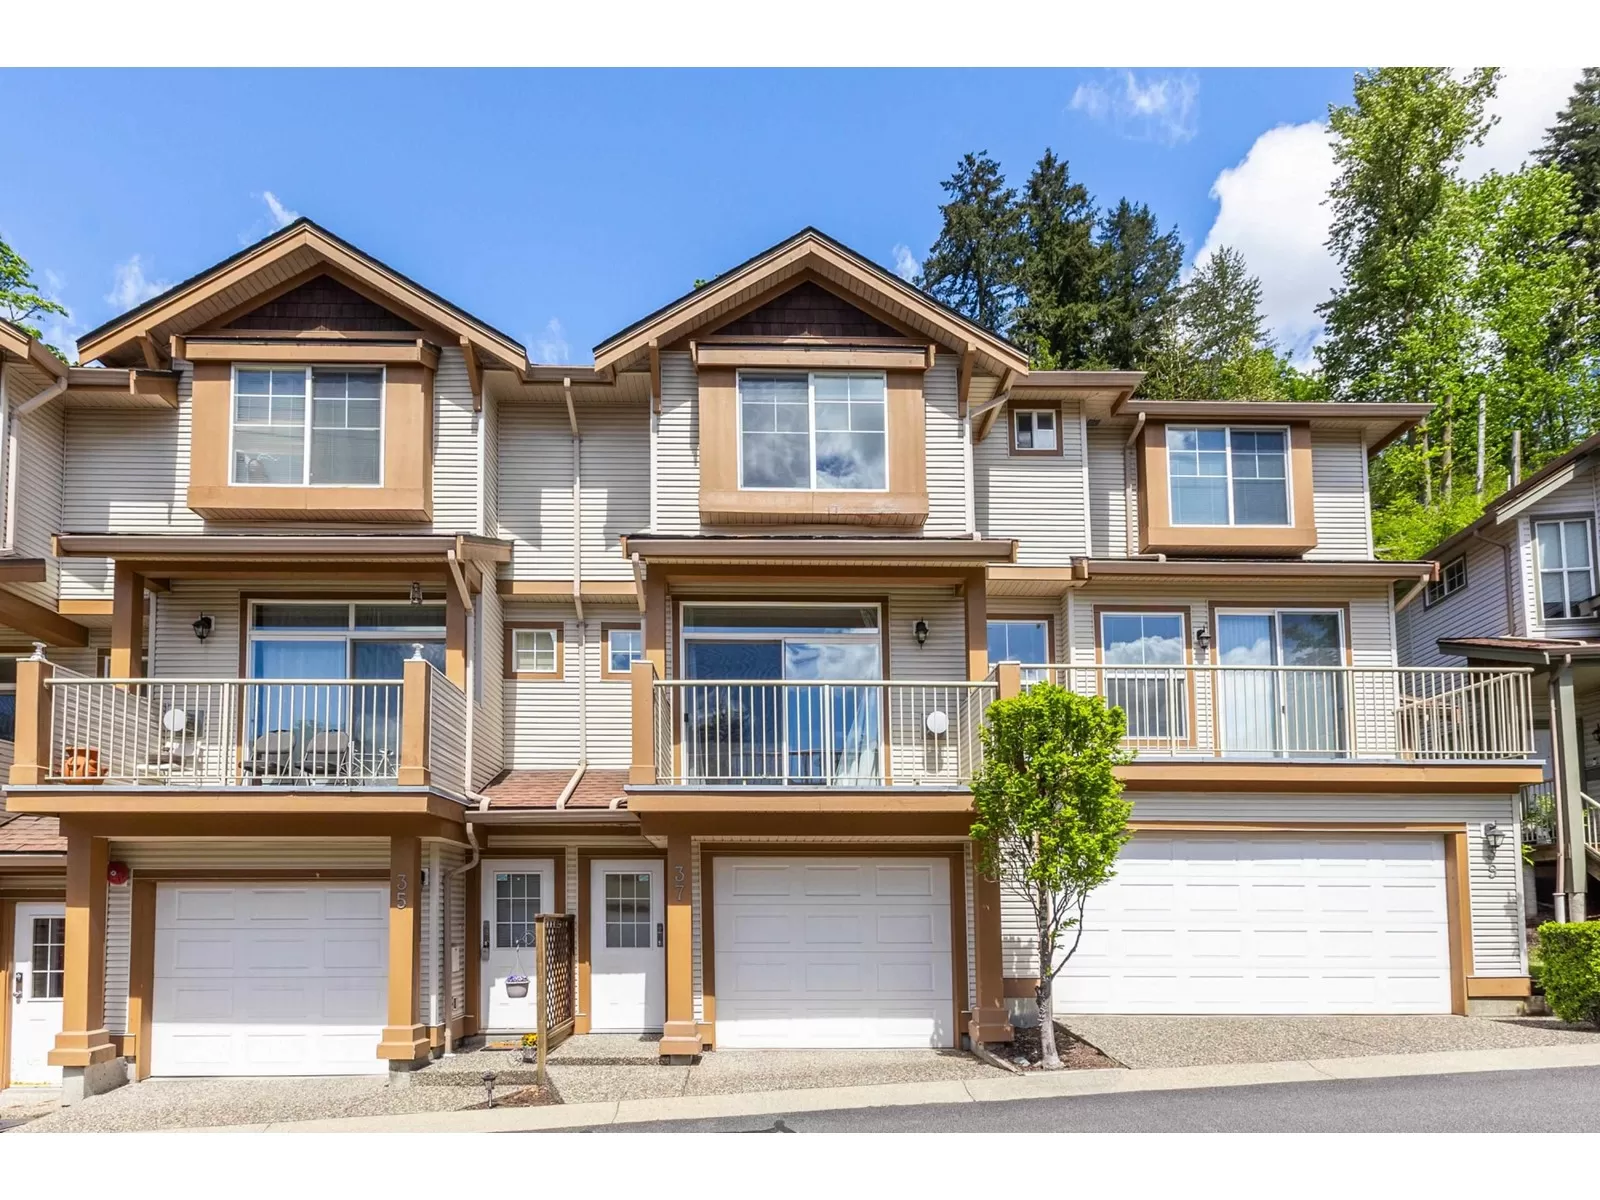 Row / Townhouse for rent: 37 35287 Old Yale Road, Abbotsford, British Columbia V3G 8H5